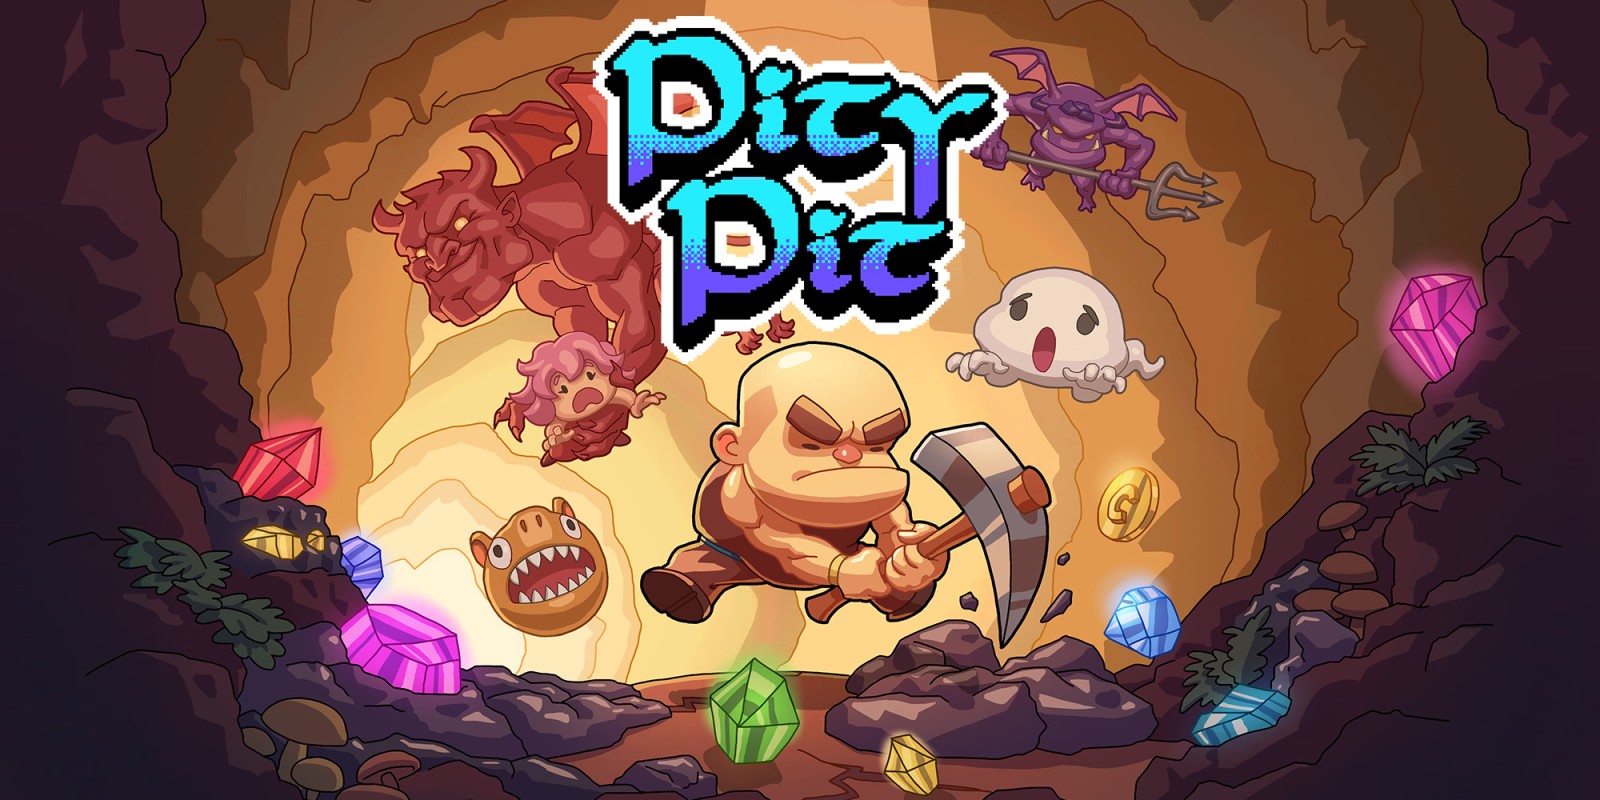 free download pit people switch